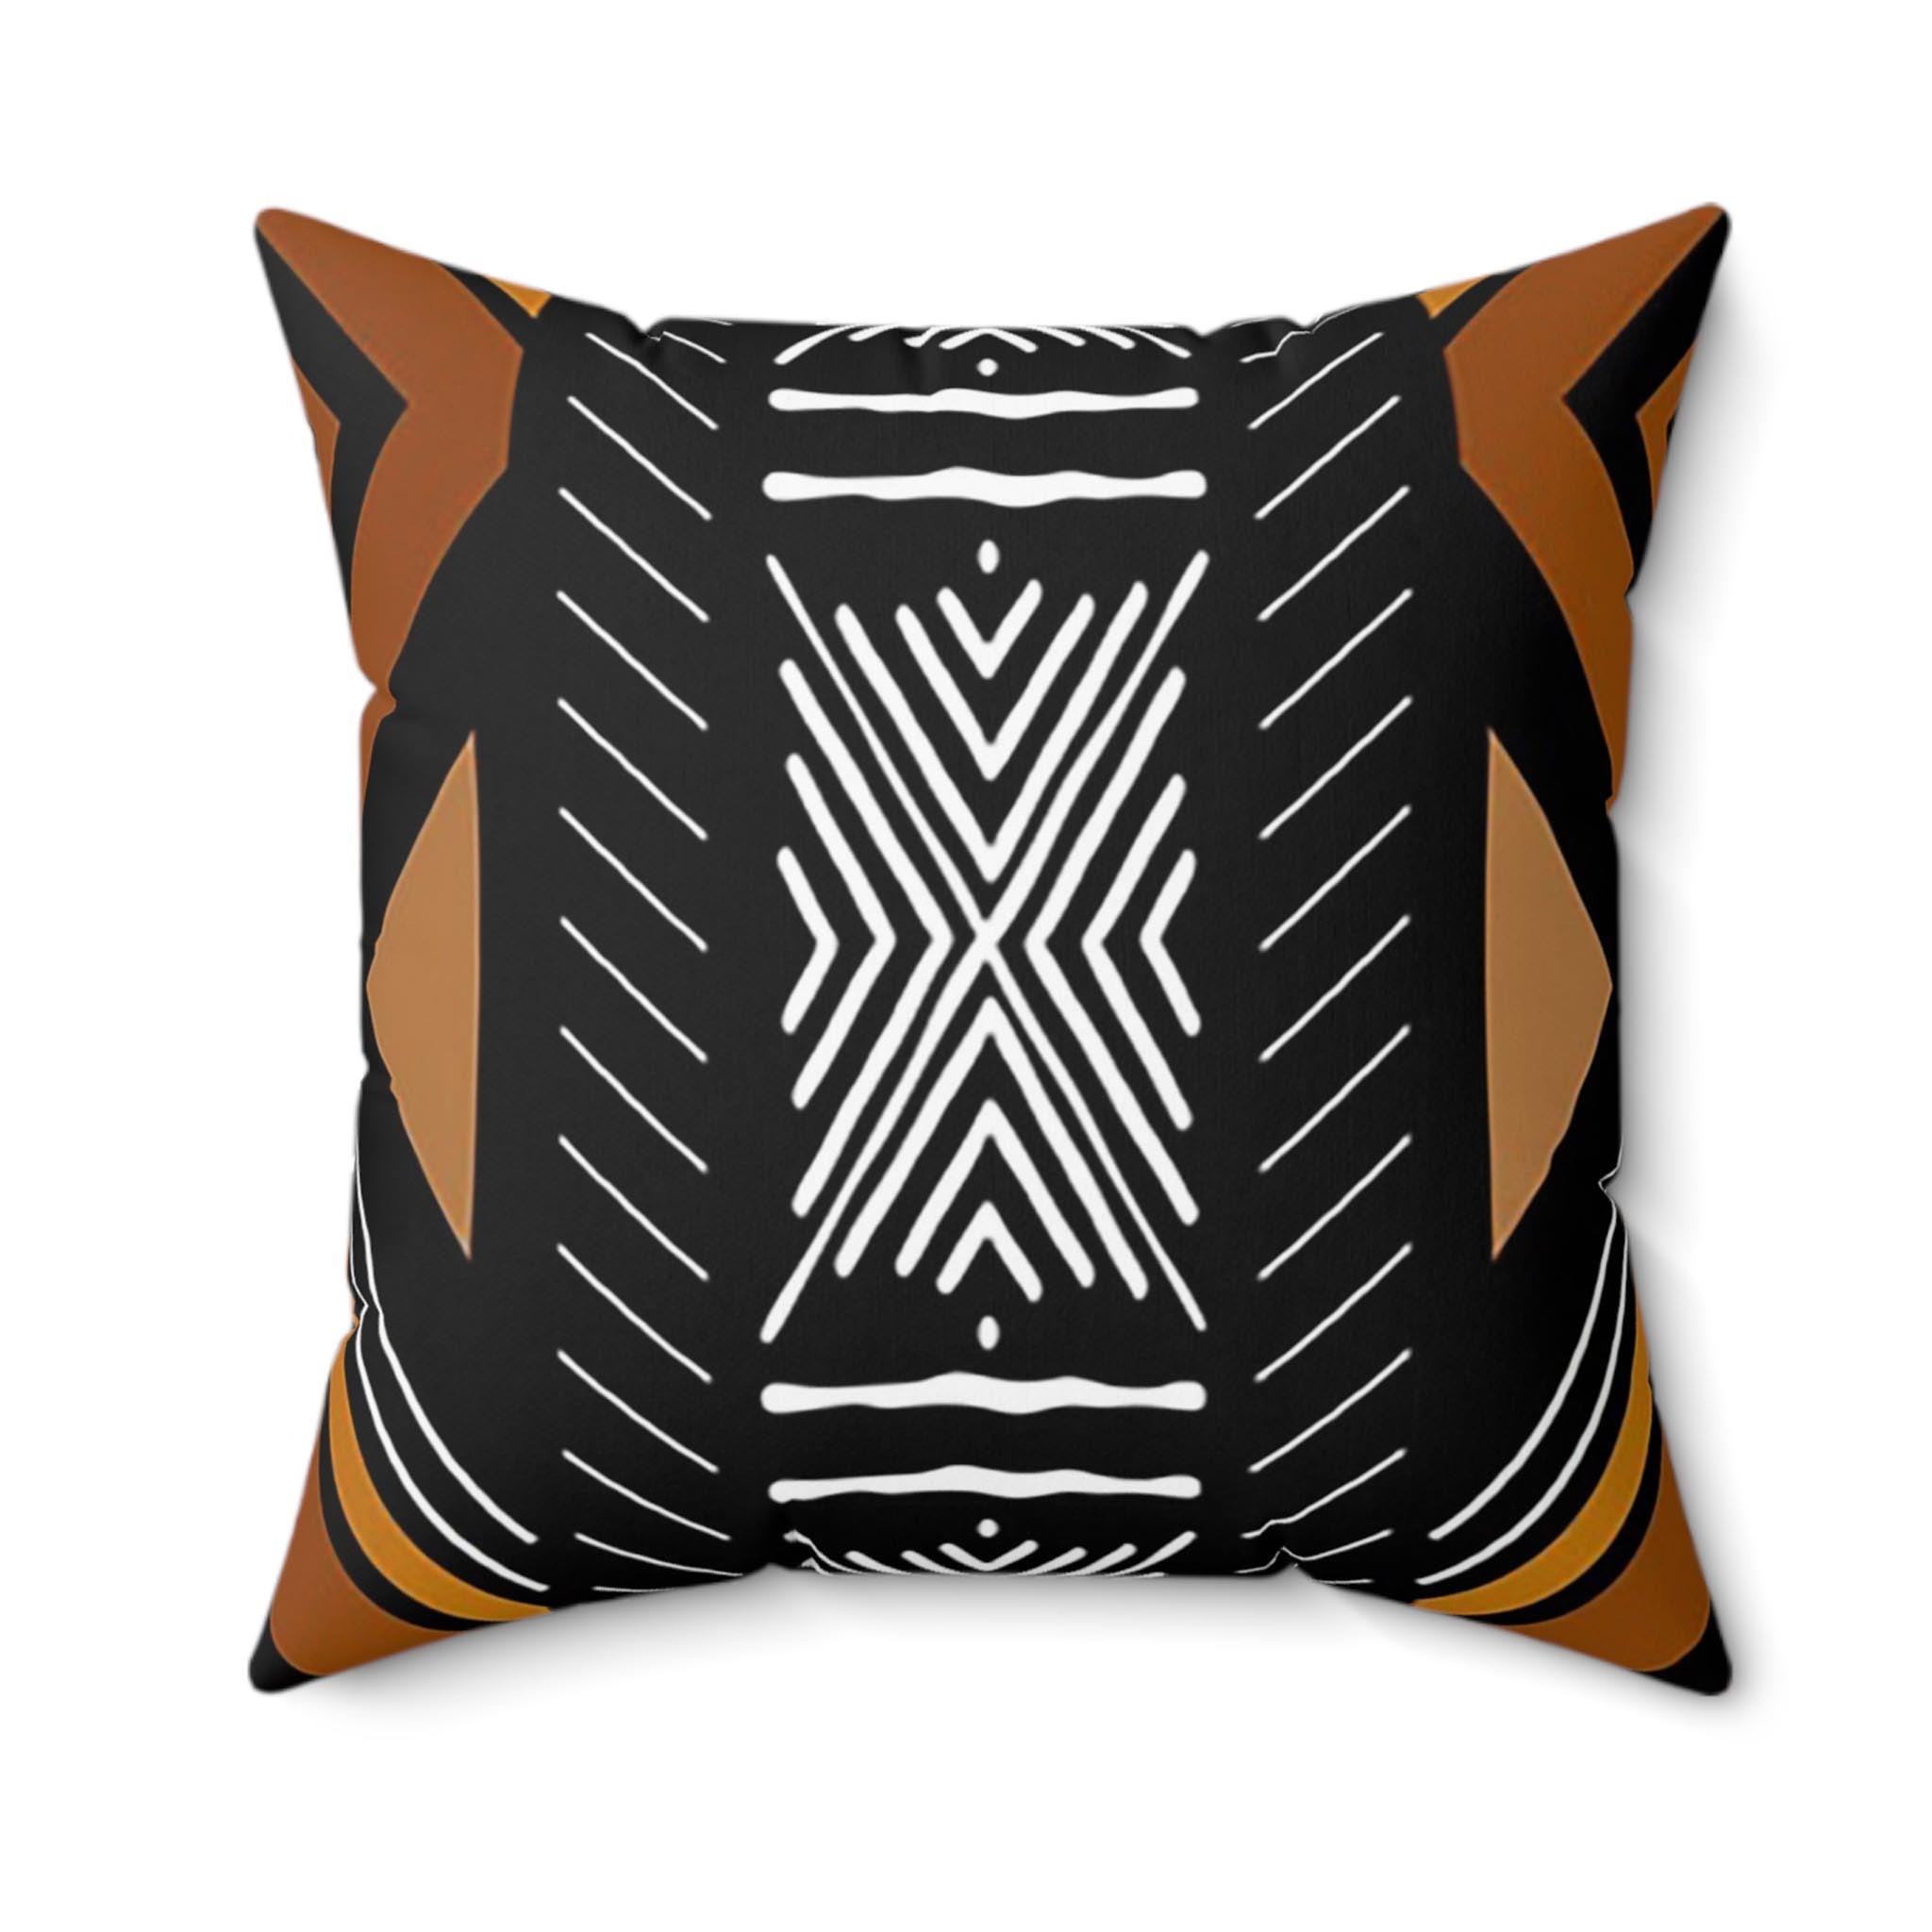 African Fabric Pillow Covers Cushion case in Tribal Pattern